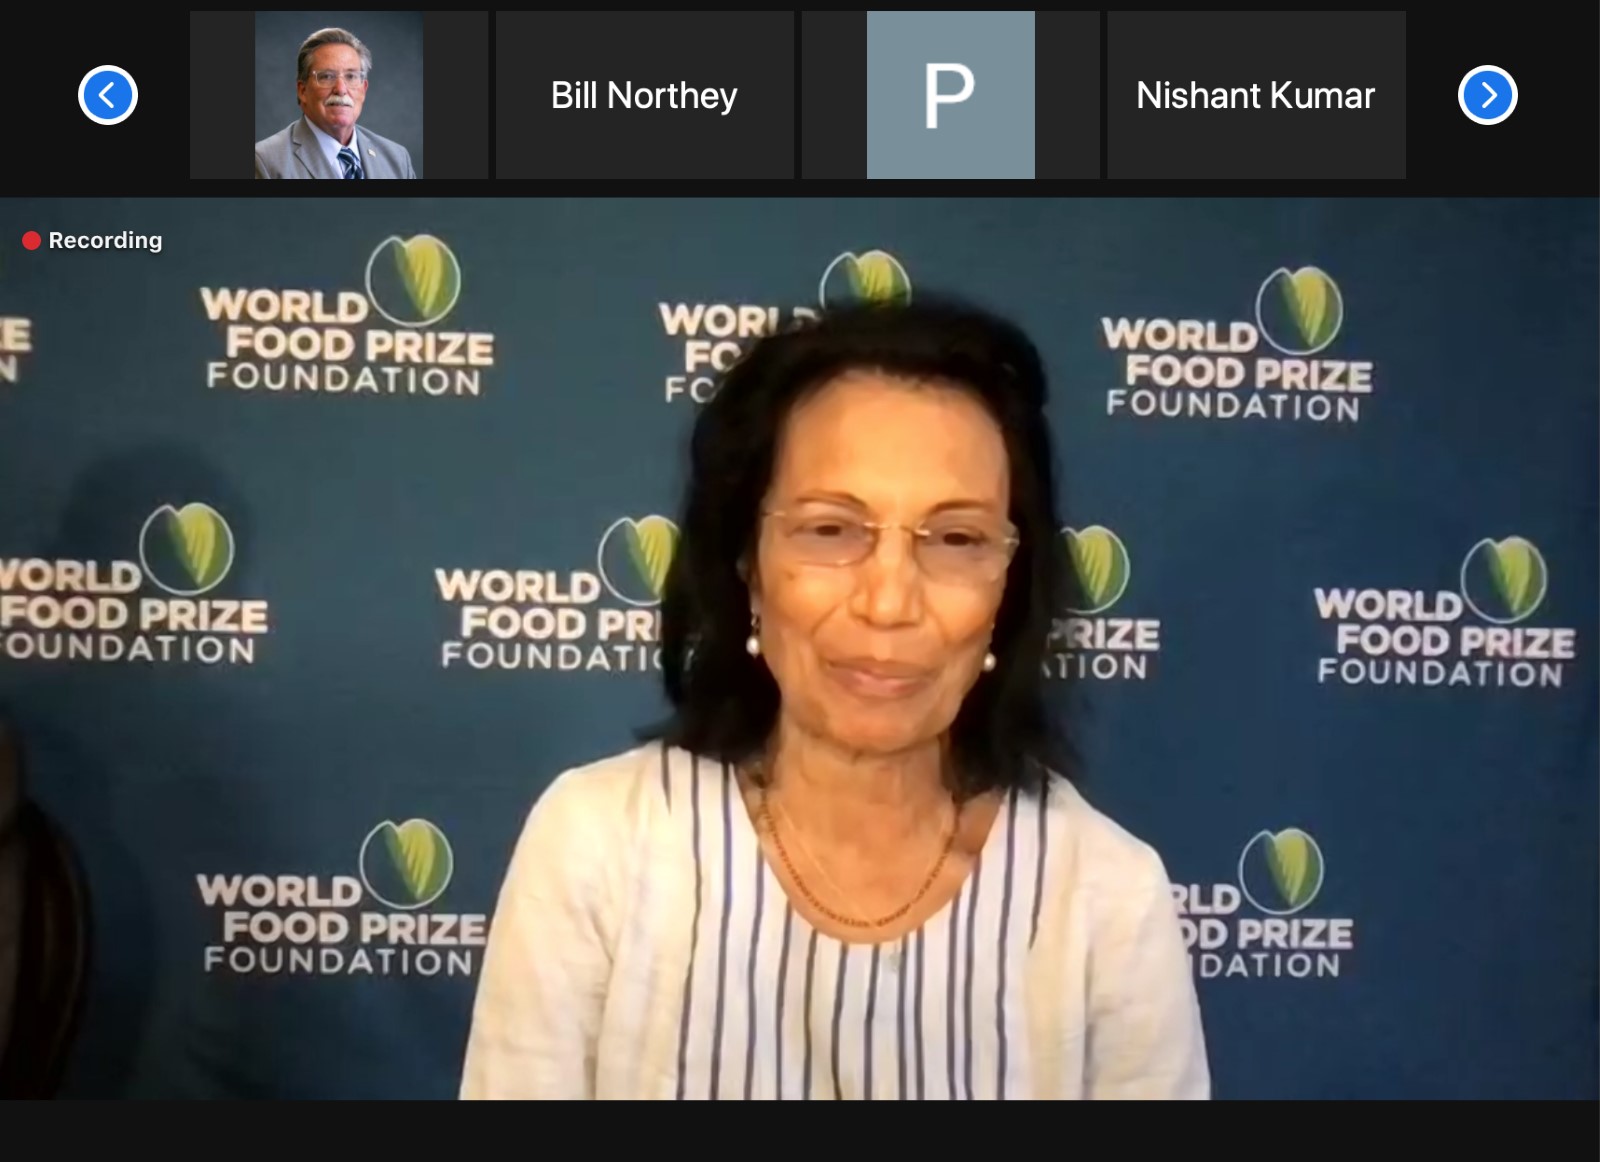 Shakuntala Thilsted shared her thoughts on the fight against global hunger at the 2021 Iowa India Summit. Photo is screenshot of virtual proceedings.